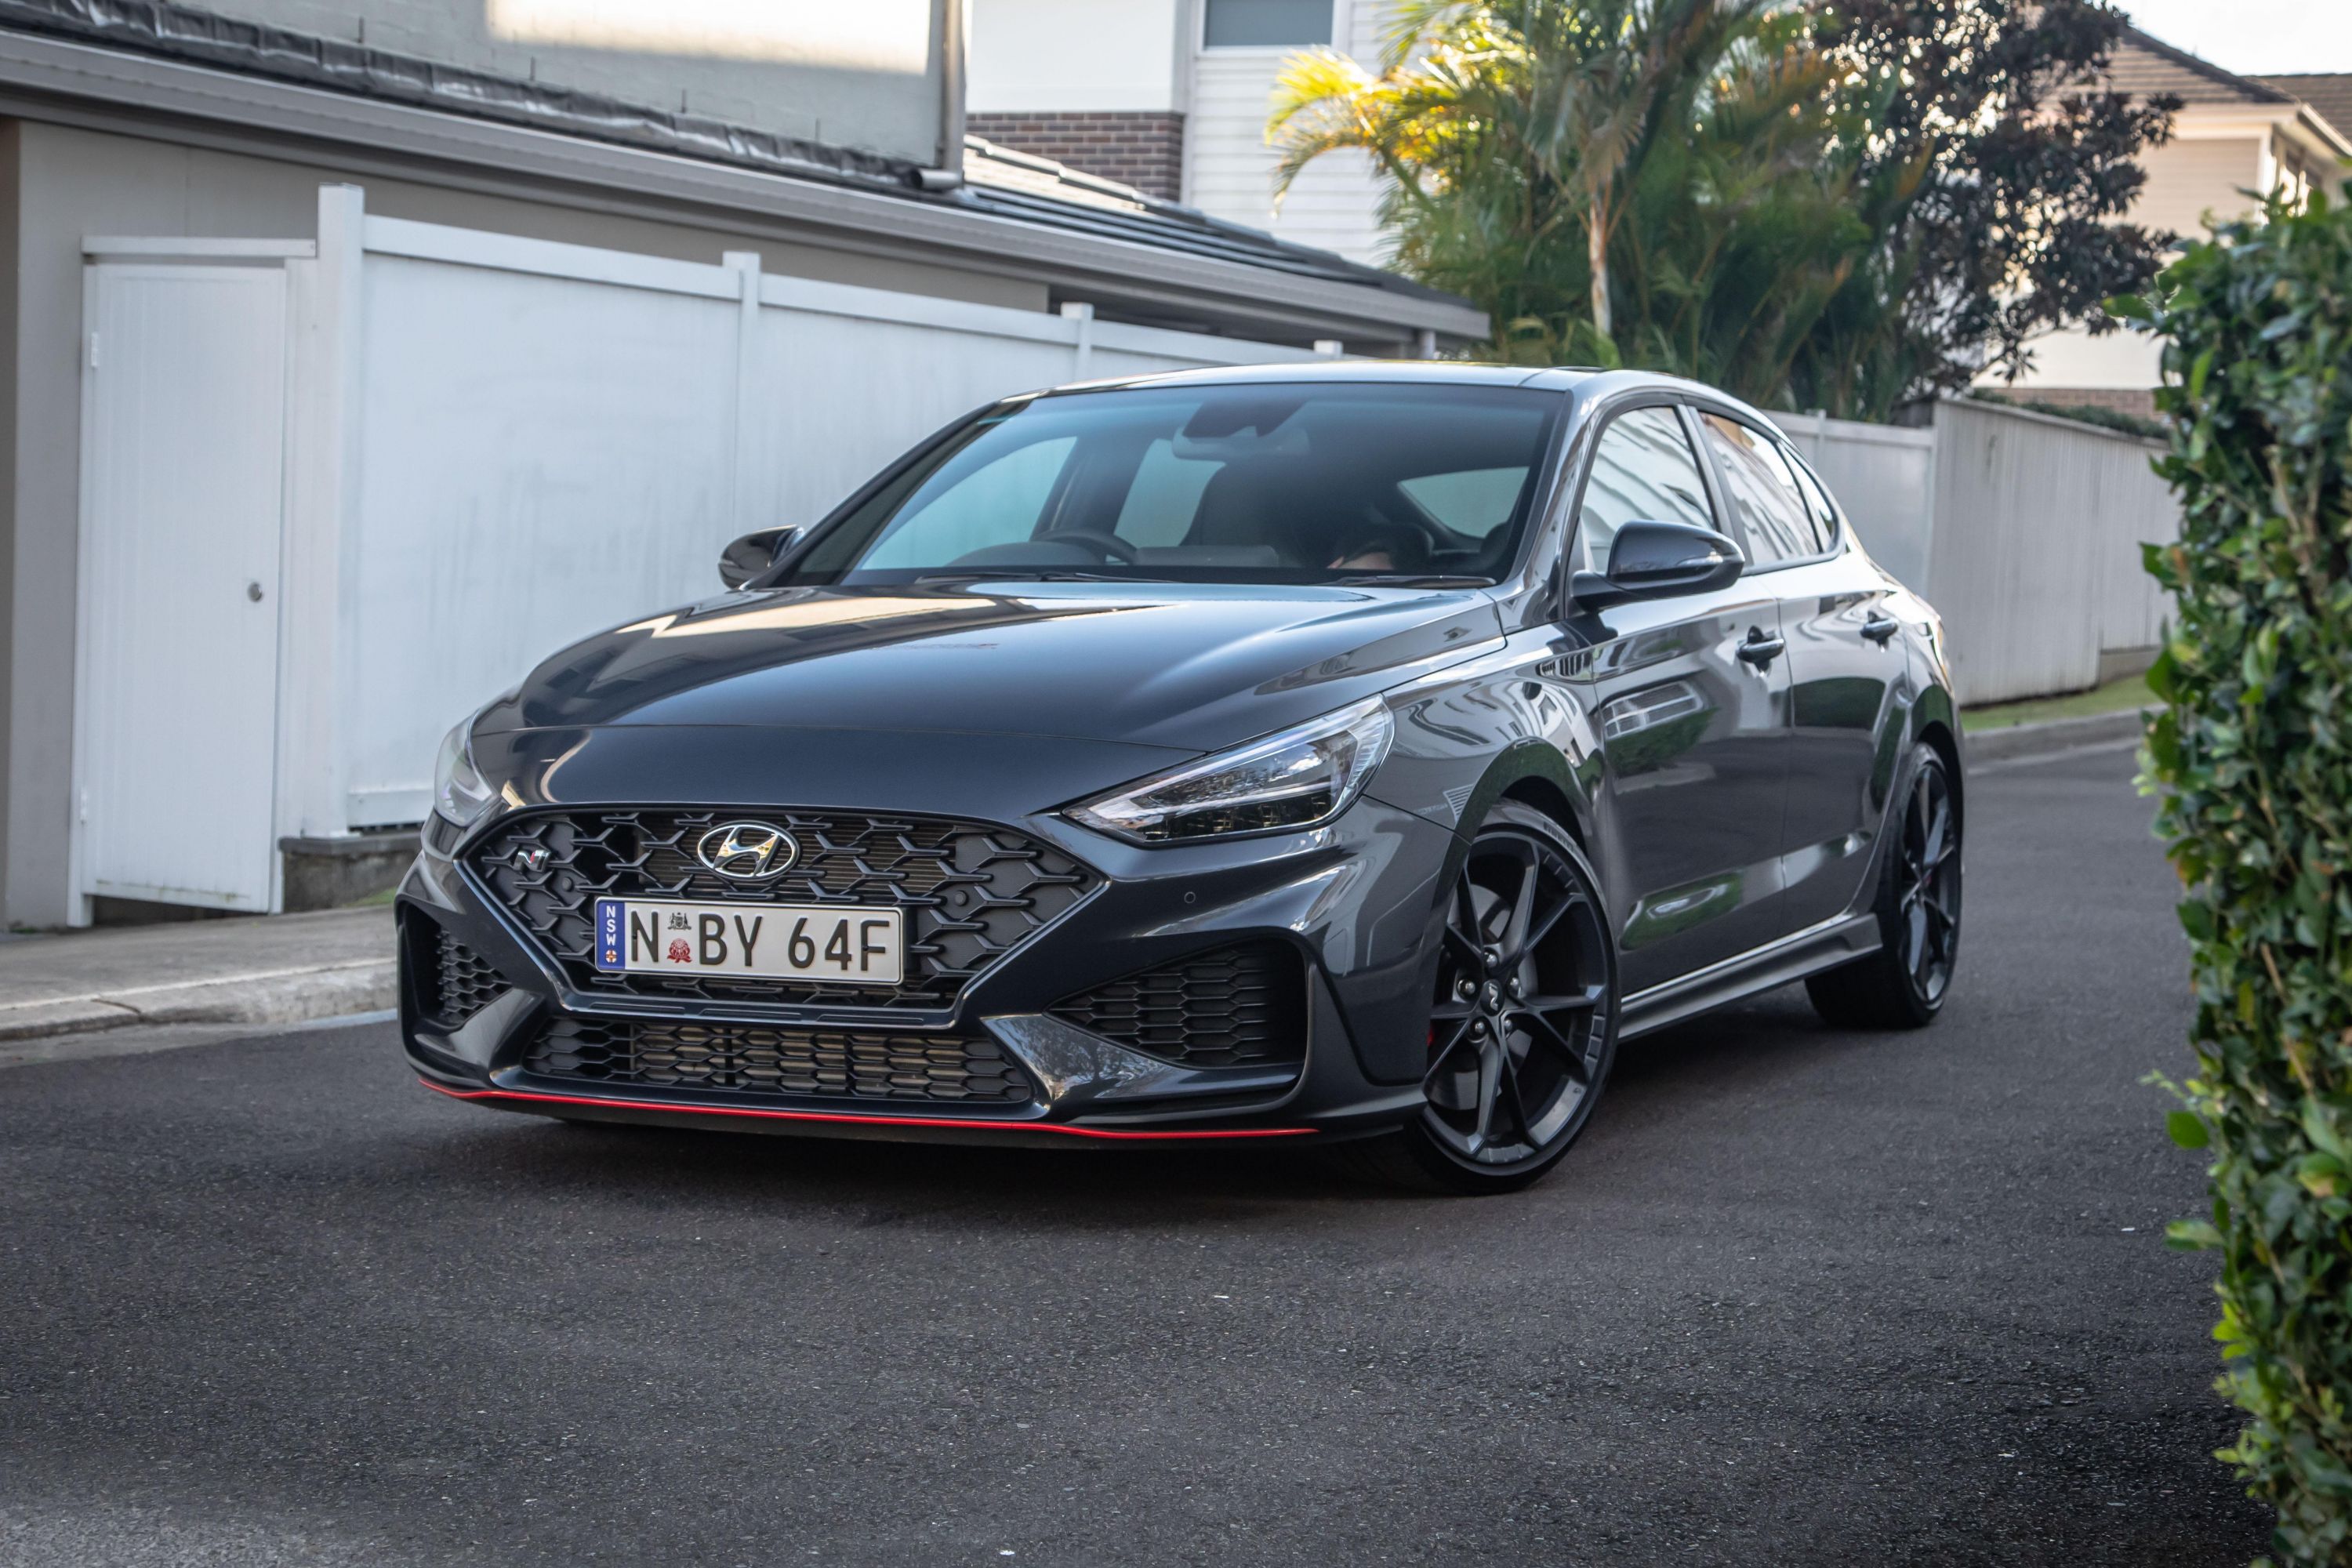 2022 Hyundai Fastback N Limited Edition review